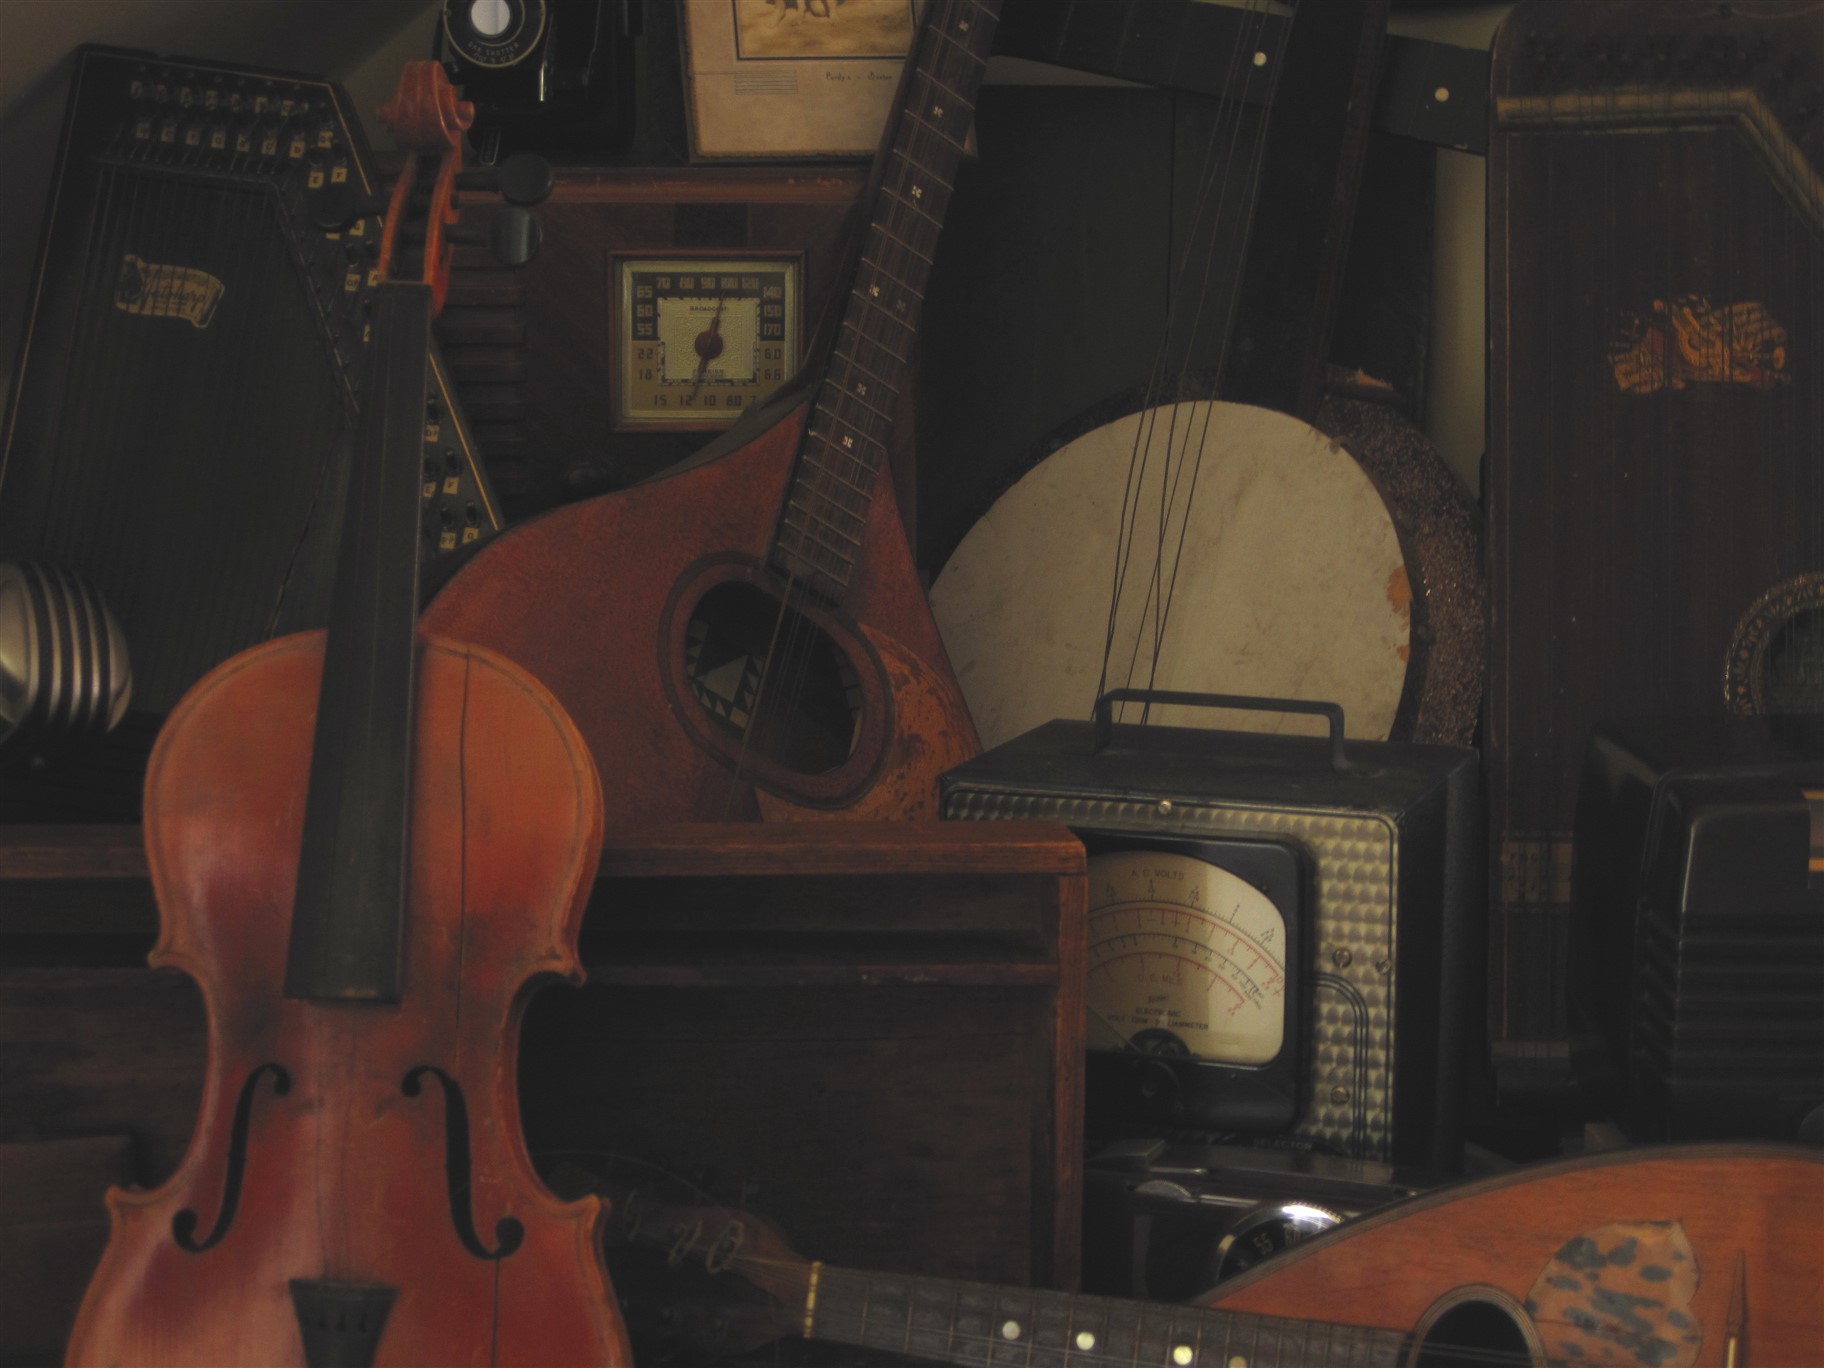 Musical instruments with old radios in low light